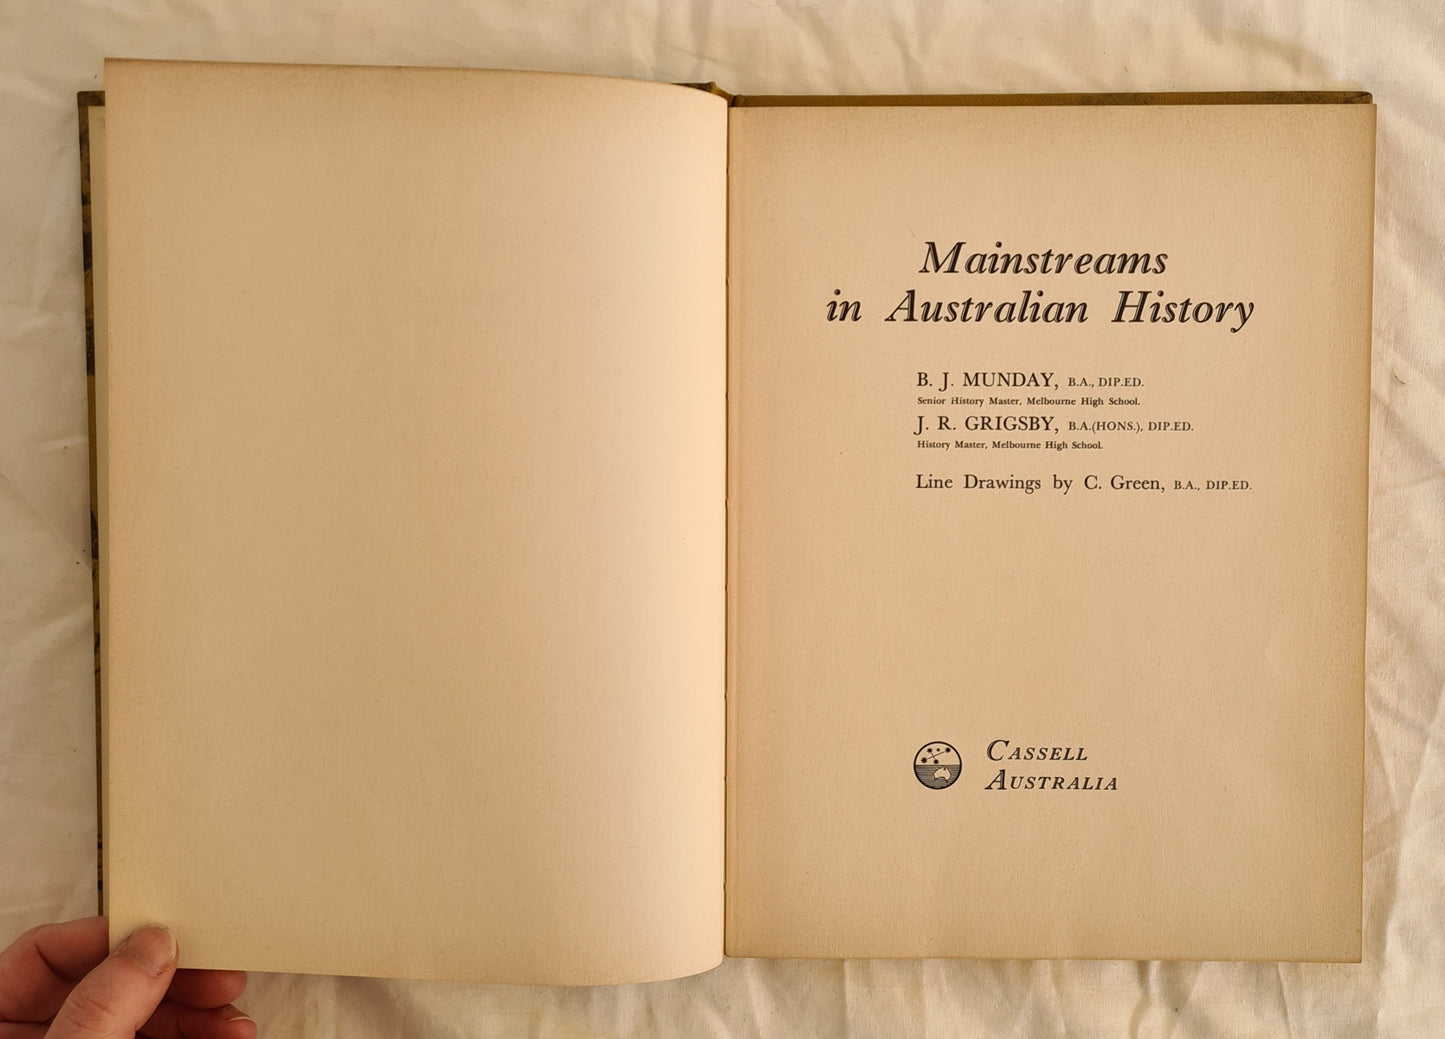 Mainstreams in Australian History by B. J. Munday and J. R. Grigsby